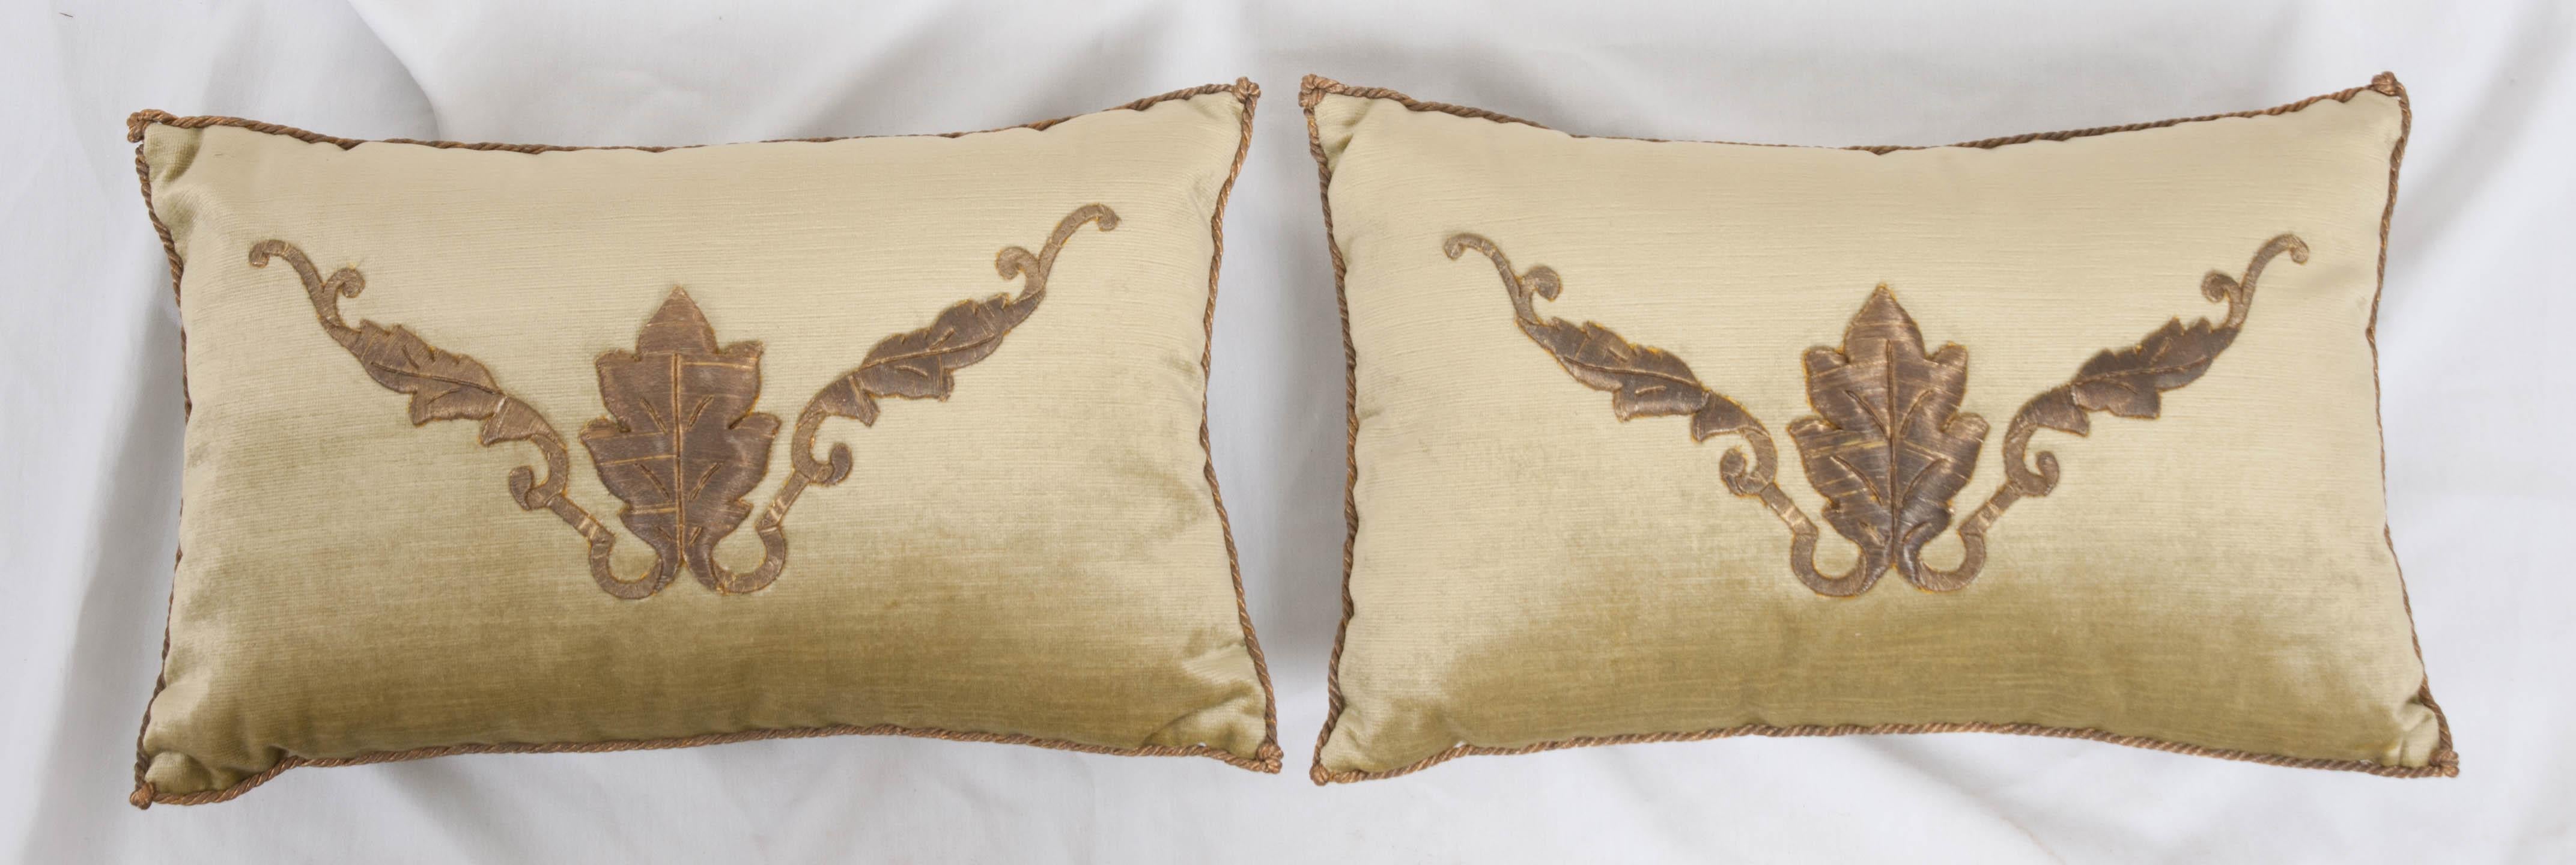 Antique European raised gold metallic embroidery on pale chartreuse velvet, hand-trimmed with gold metallic cording which is knotted at the corners. Down-filled. Designed by Rebecca Vizard for V. Biz Design. Available for individual purchase at